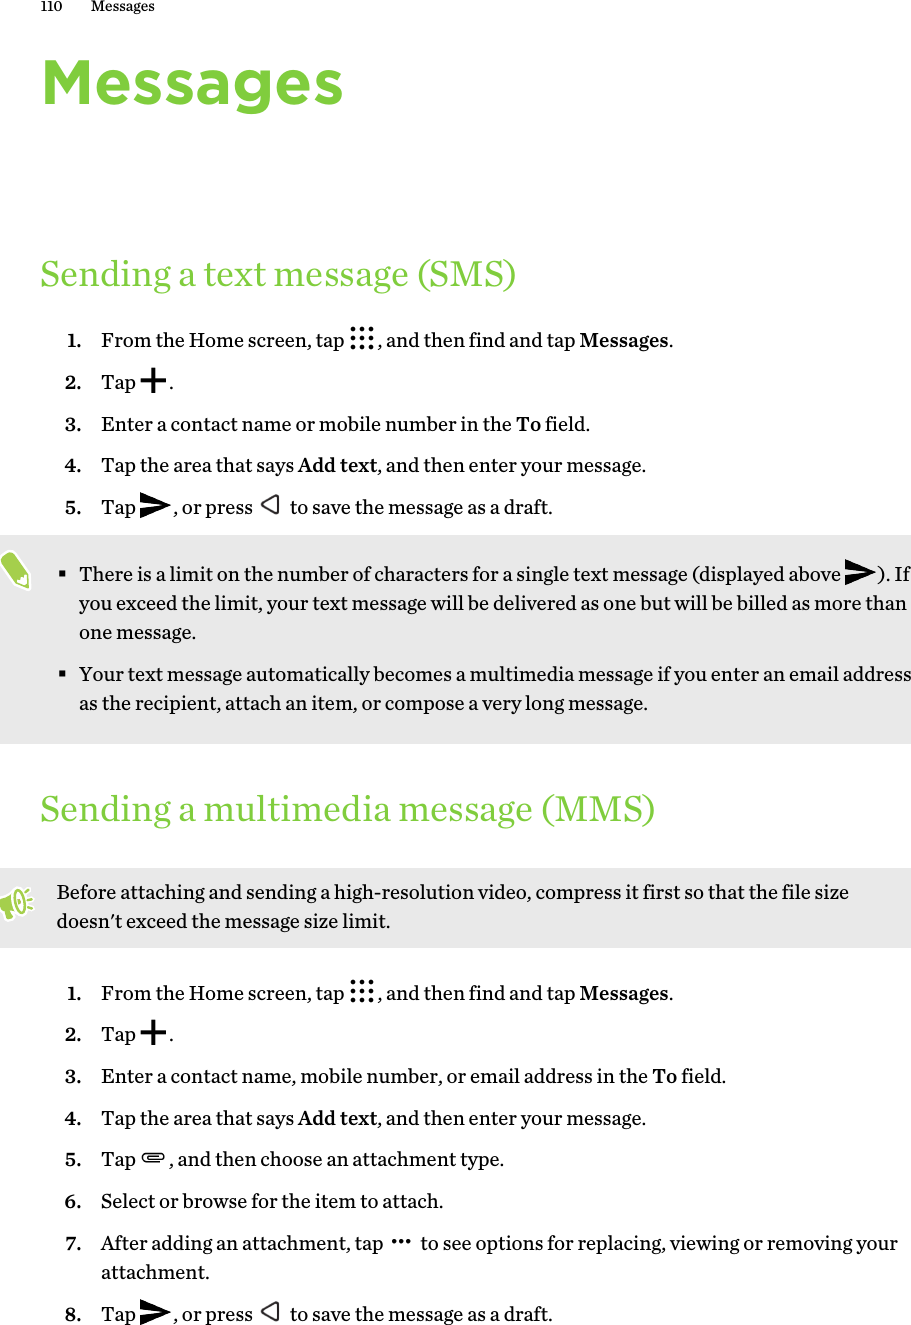 MessagesSending a text message (SMS)1. From the Home screen, tap  , and then find and tap Messages.2. Tap  .3. Enter a contact name or mobile number in the To field.4. Tap the area that says Add text, and then enter your message.5. Tap  , or press   to save the message as a draft. §There is a limit on the number of characters for a single text message (displayed above  ). If you exceed the limit, your text message will be delivered as one but will be billed as more than one message.§Your text message automatically becomes a multimedia message if you enter an email address as the recipient, attach an item, or compose a very long message.Sending a multimedia message (MMS)Before attaching and sending a high-resolution video, compress it first so that the file size doesn&apos;t exceed the message size limit.1. From the Home screen, tap  , and then find and tap Messages.2. Tap  .3. Enter a contact name, mobile number, or email address in the To field.4. Tap the area that says Add text, and then enter your message.5. Tap  , and then choose an attachment type.6. Select or browse for the item to attach.7. After adding an attachment, tap   to see options for replacing, viewing or removing your attachment.8. Tap  , or press   to save the message as a draft.110 Messages